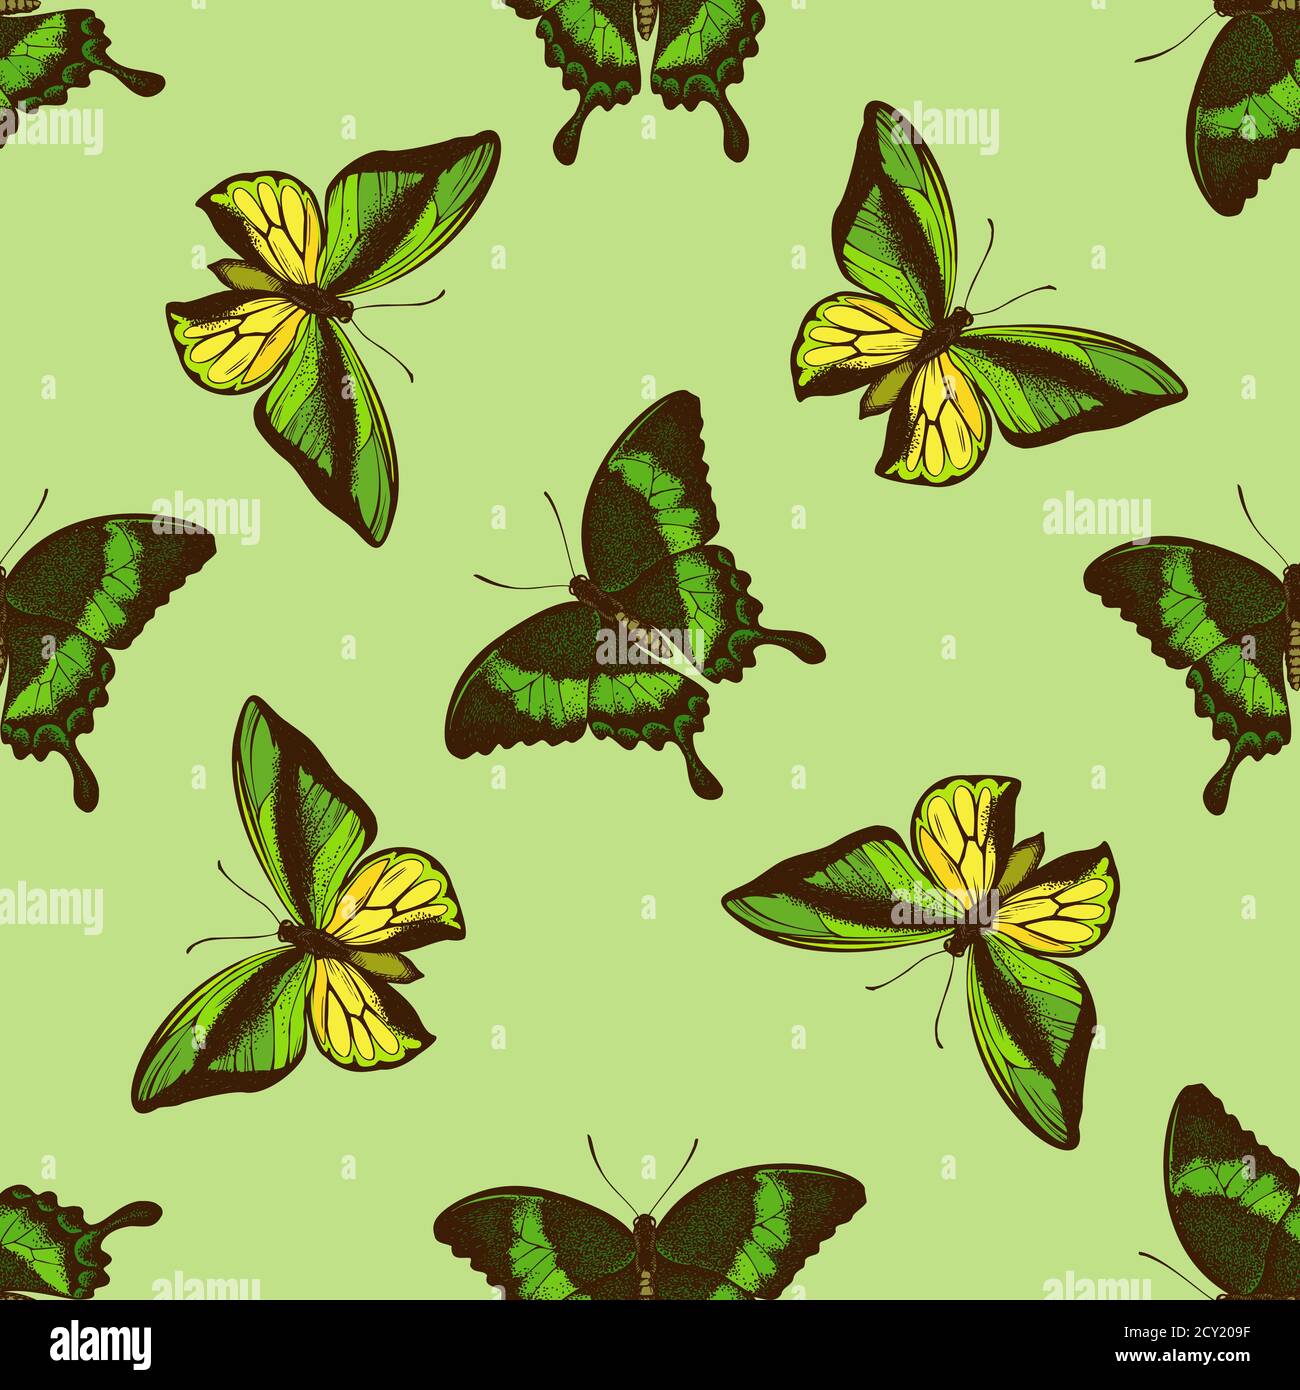 Seamless pattern with hand drawn colored emerald swallowtail, swallowtail butterfly Stock Vector